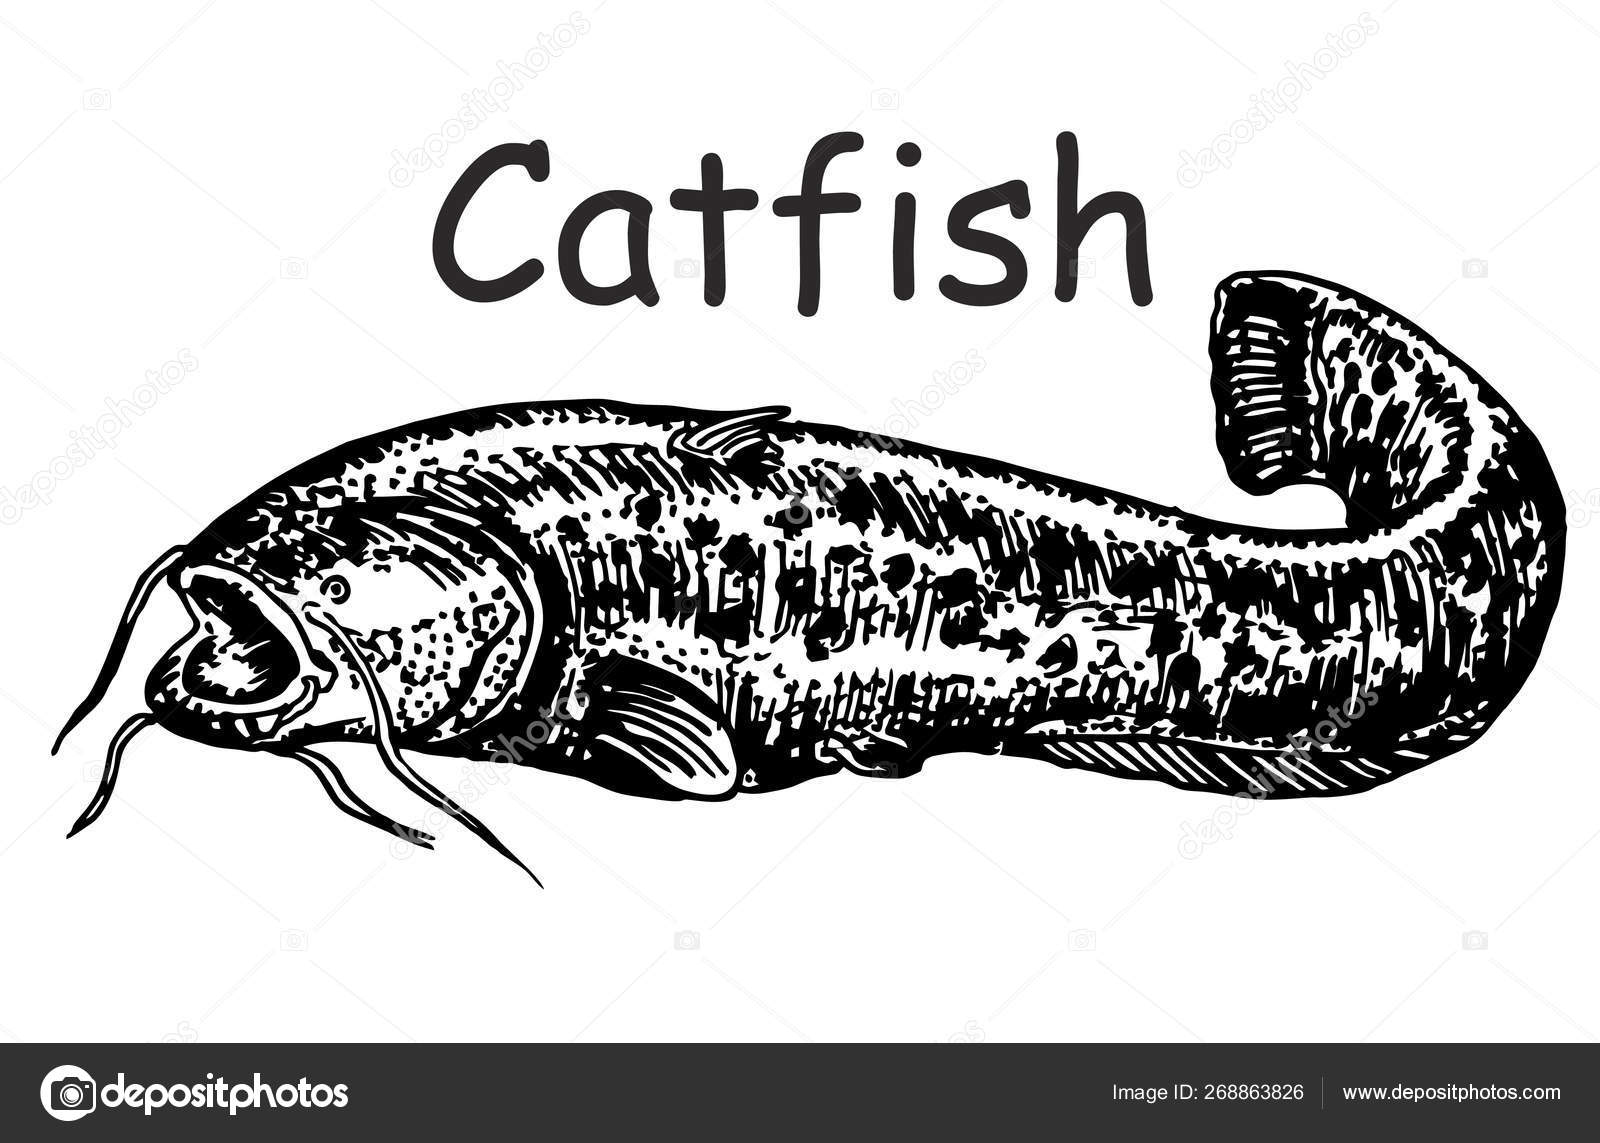 Dick pic for catfish